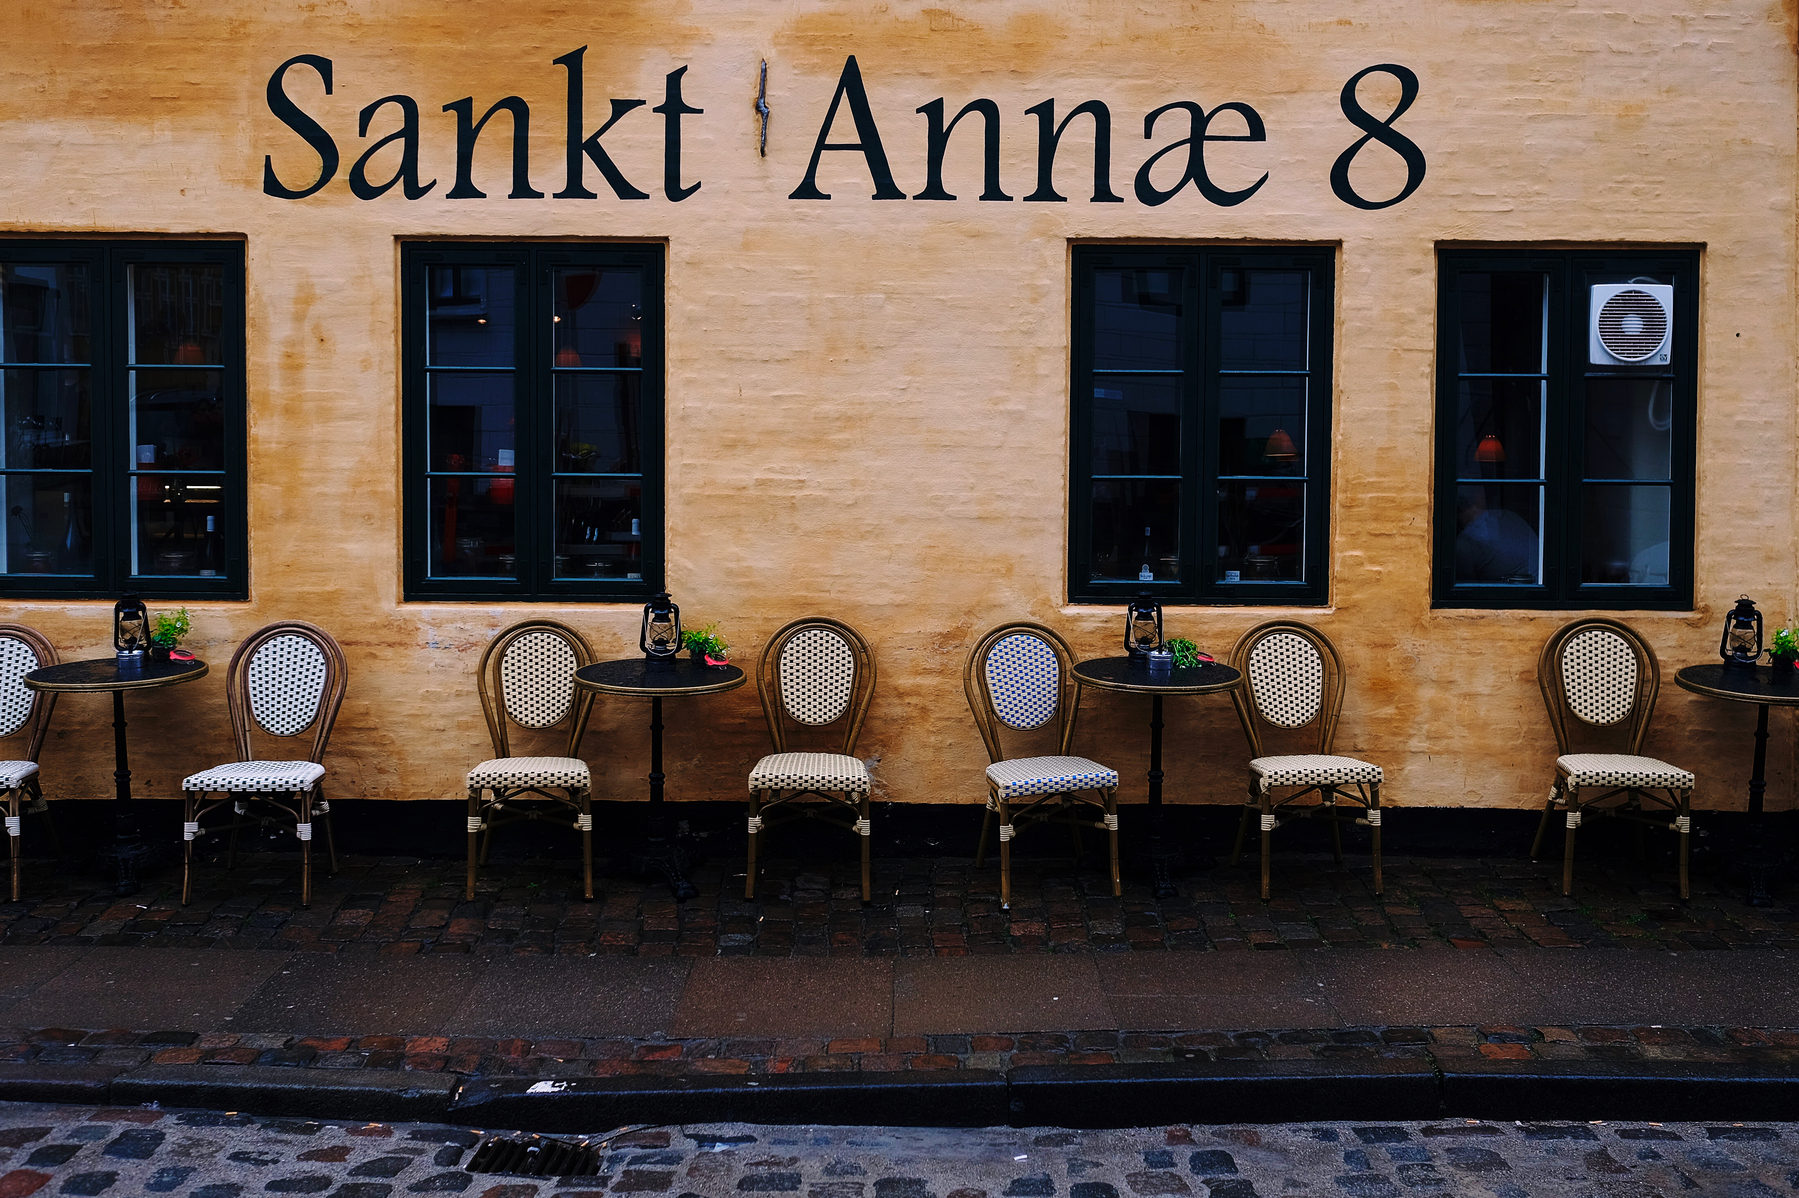 A row of chairs, neatly arranged against a wall. “Sankt Annæ 8” written on the wall. 